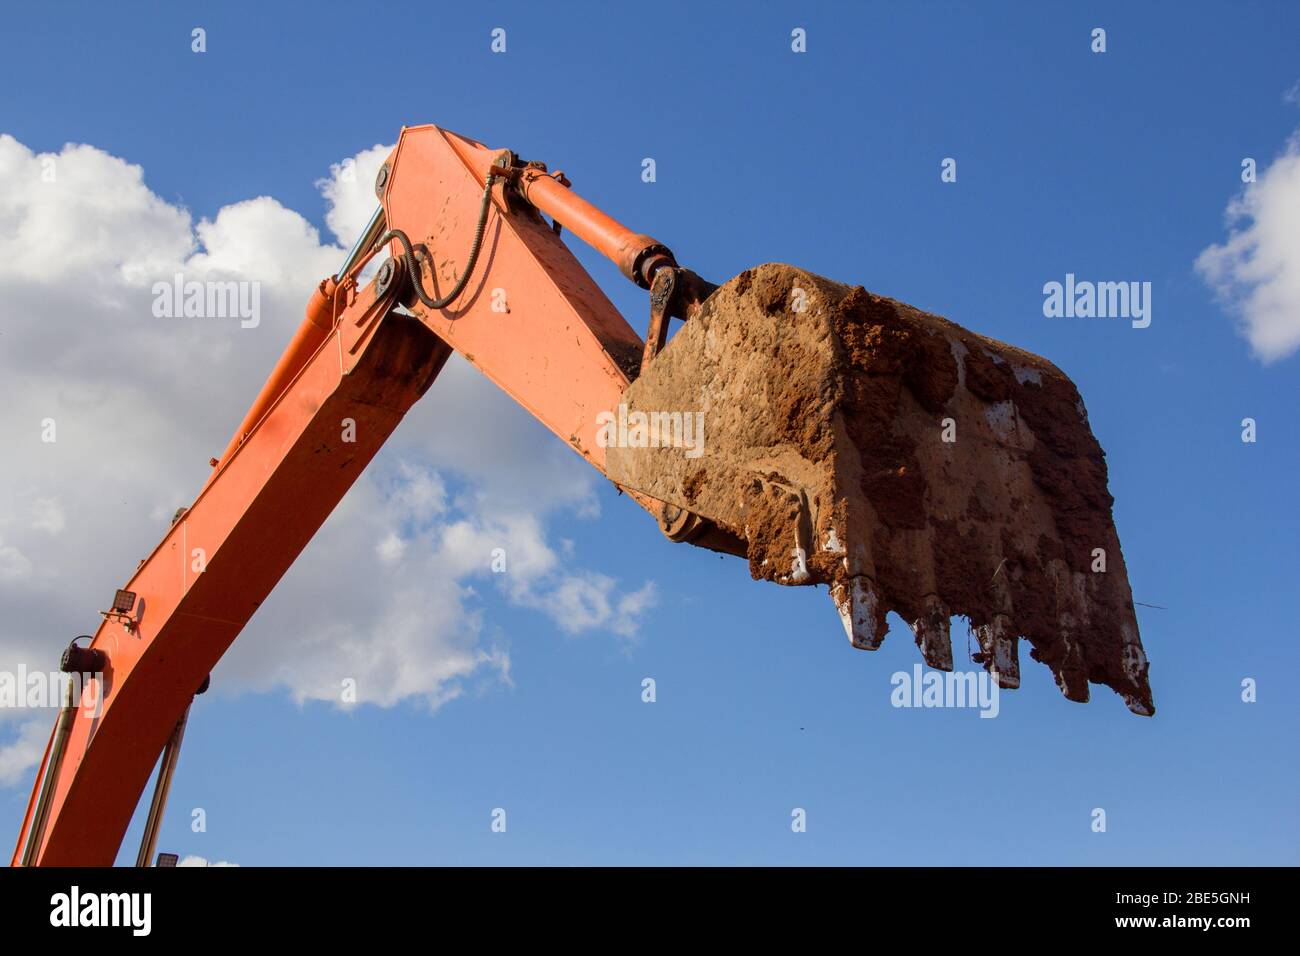 Excavator hydraulic bucket for loading materials against the sky. Stock Photo